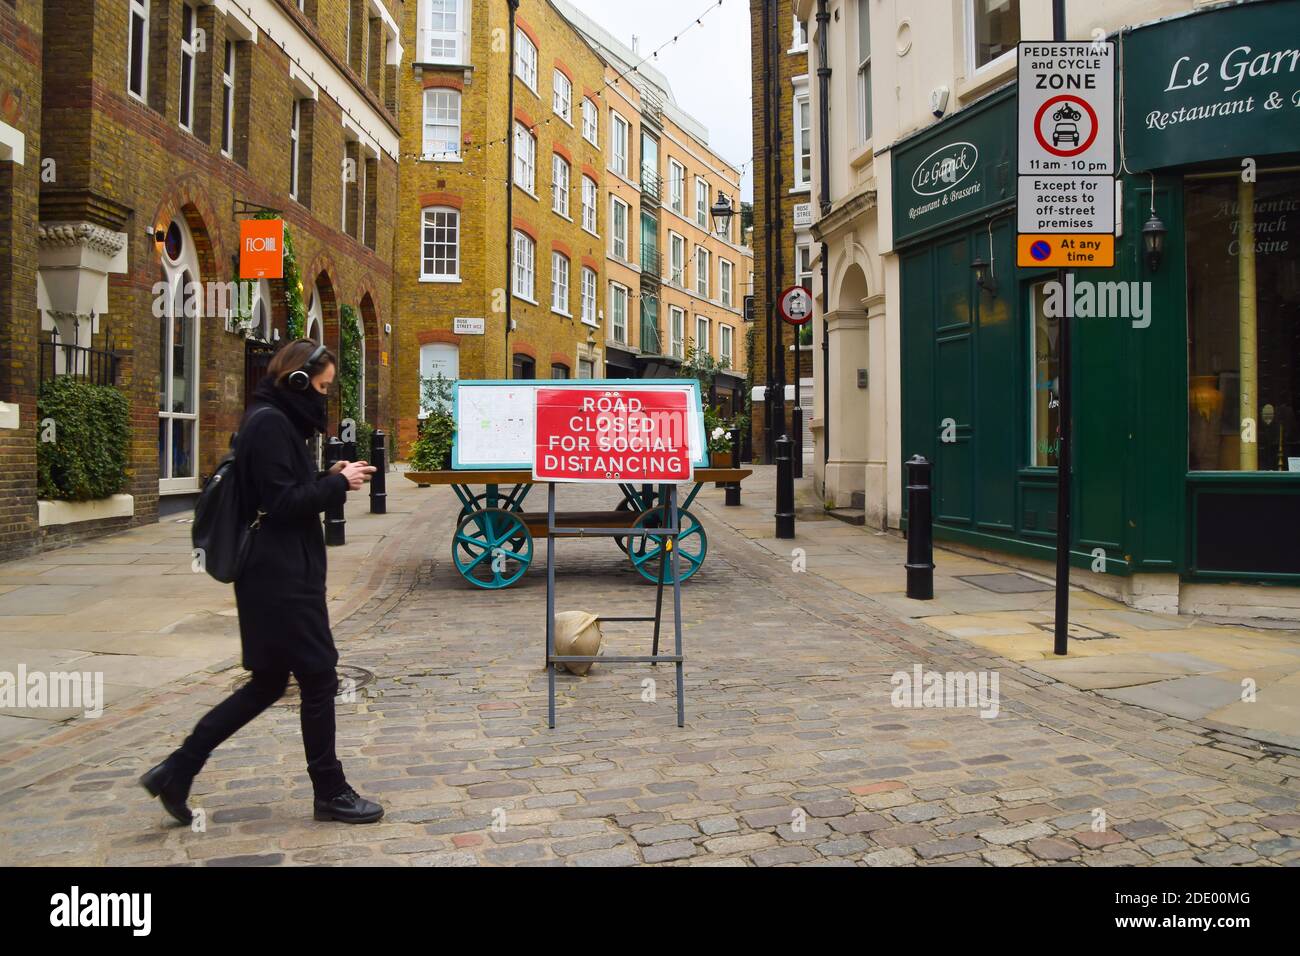 A woman wearing a protective face mask walks past a Road Closed For Social Distancing sign in Covent Garden, London. Stock Photo